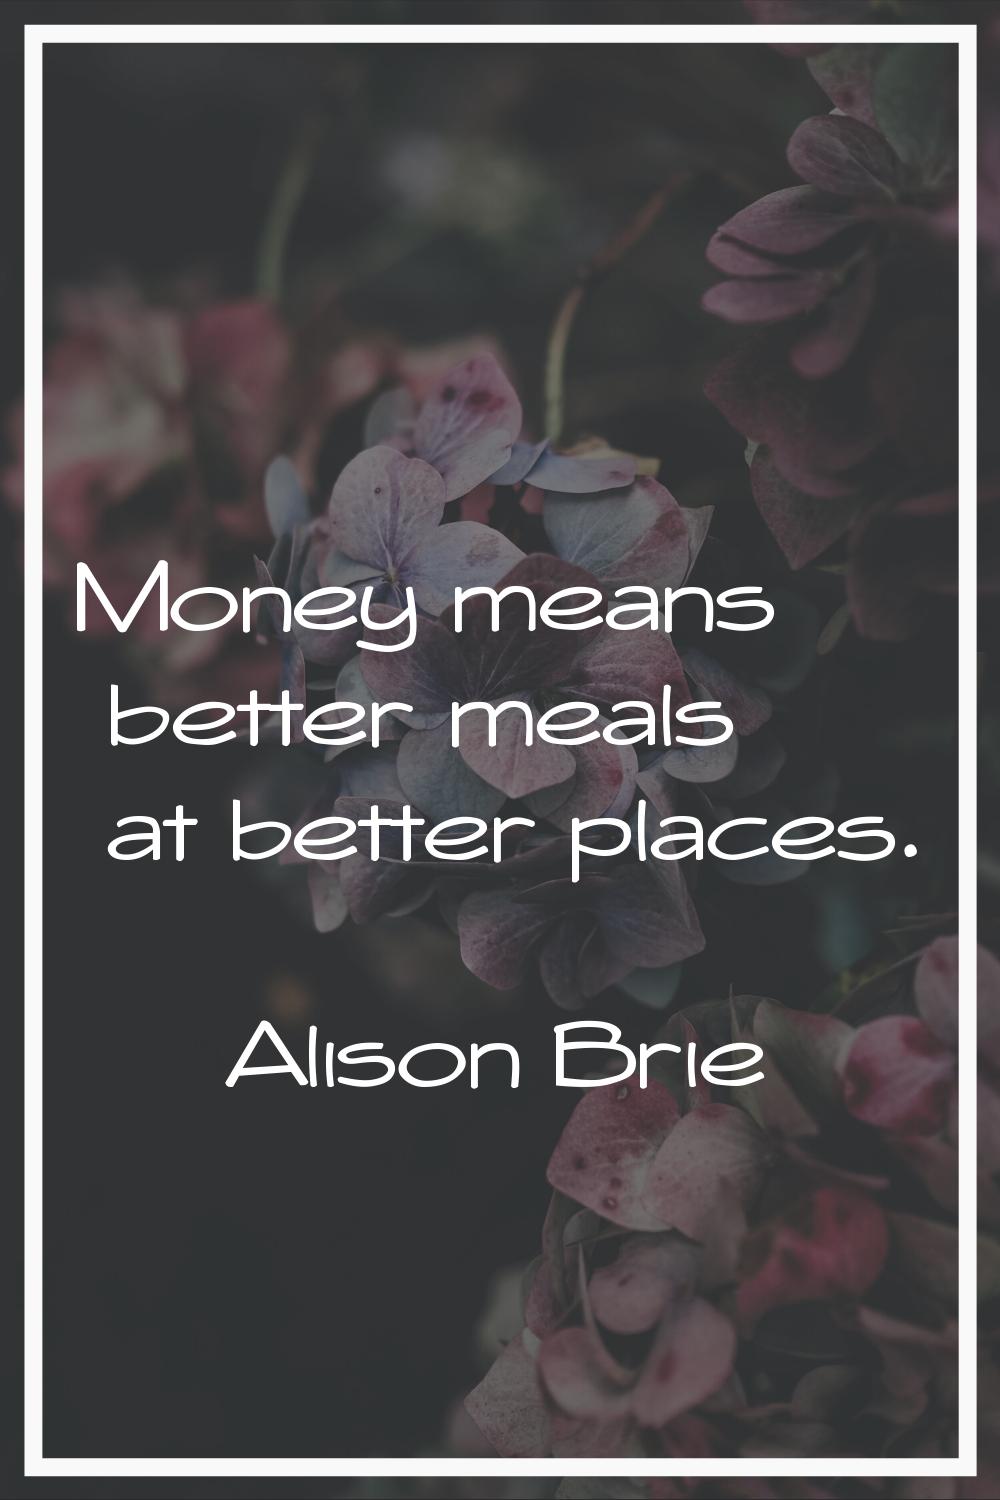 Money means better meals at better places.